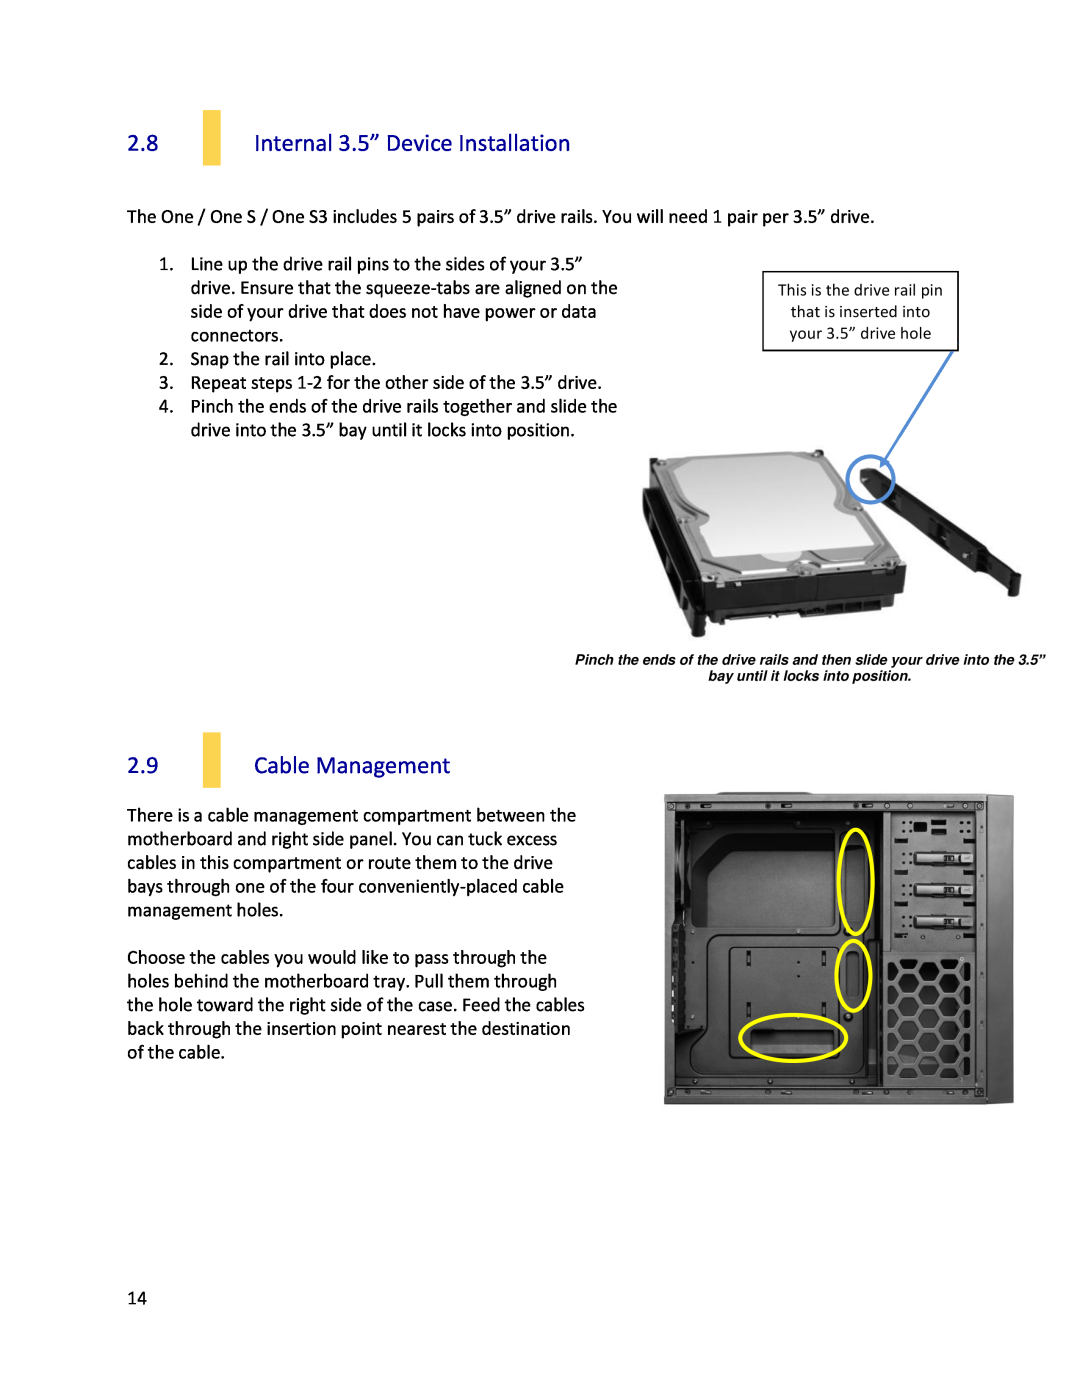 Antec ONE S3 user manual Internal 3.5” Device Installation, Cable Management 